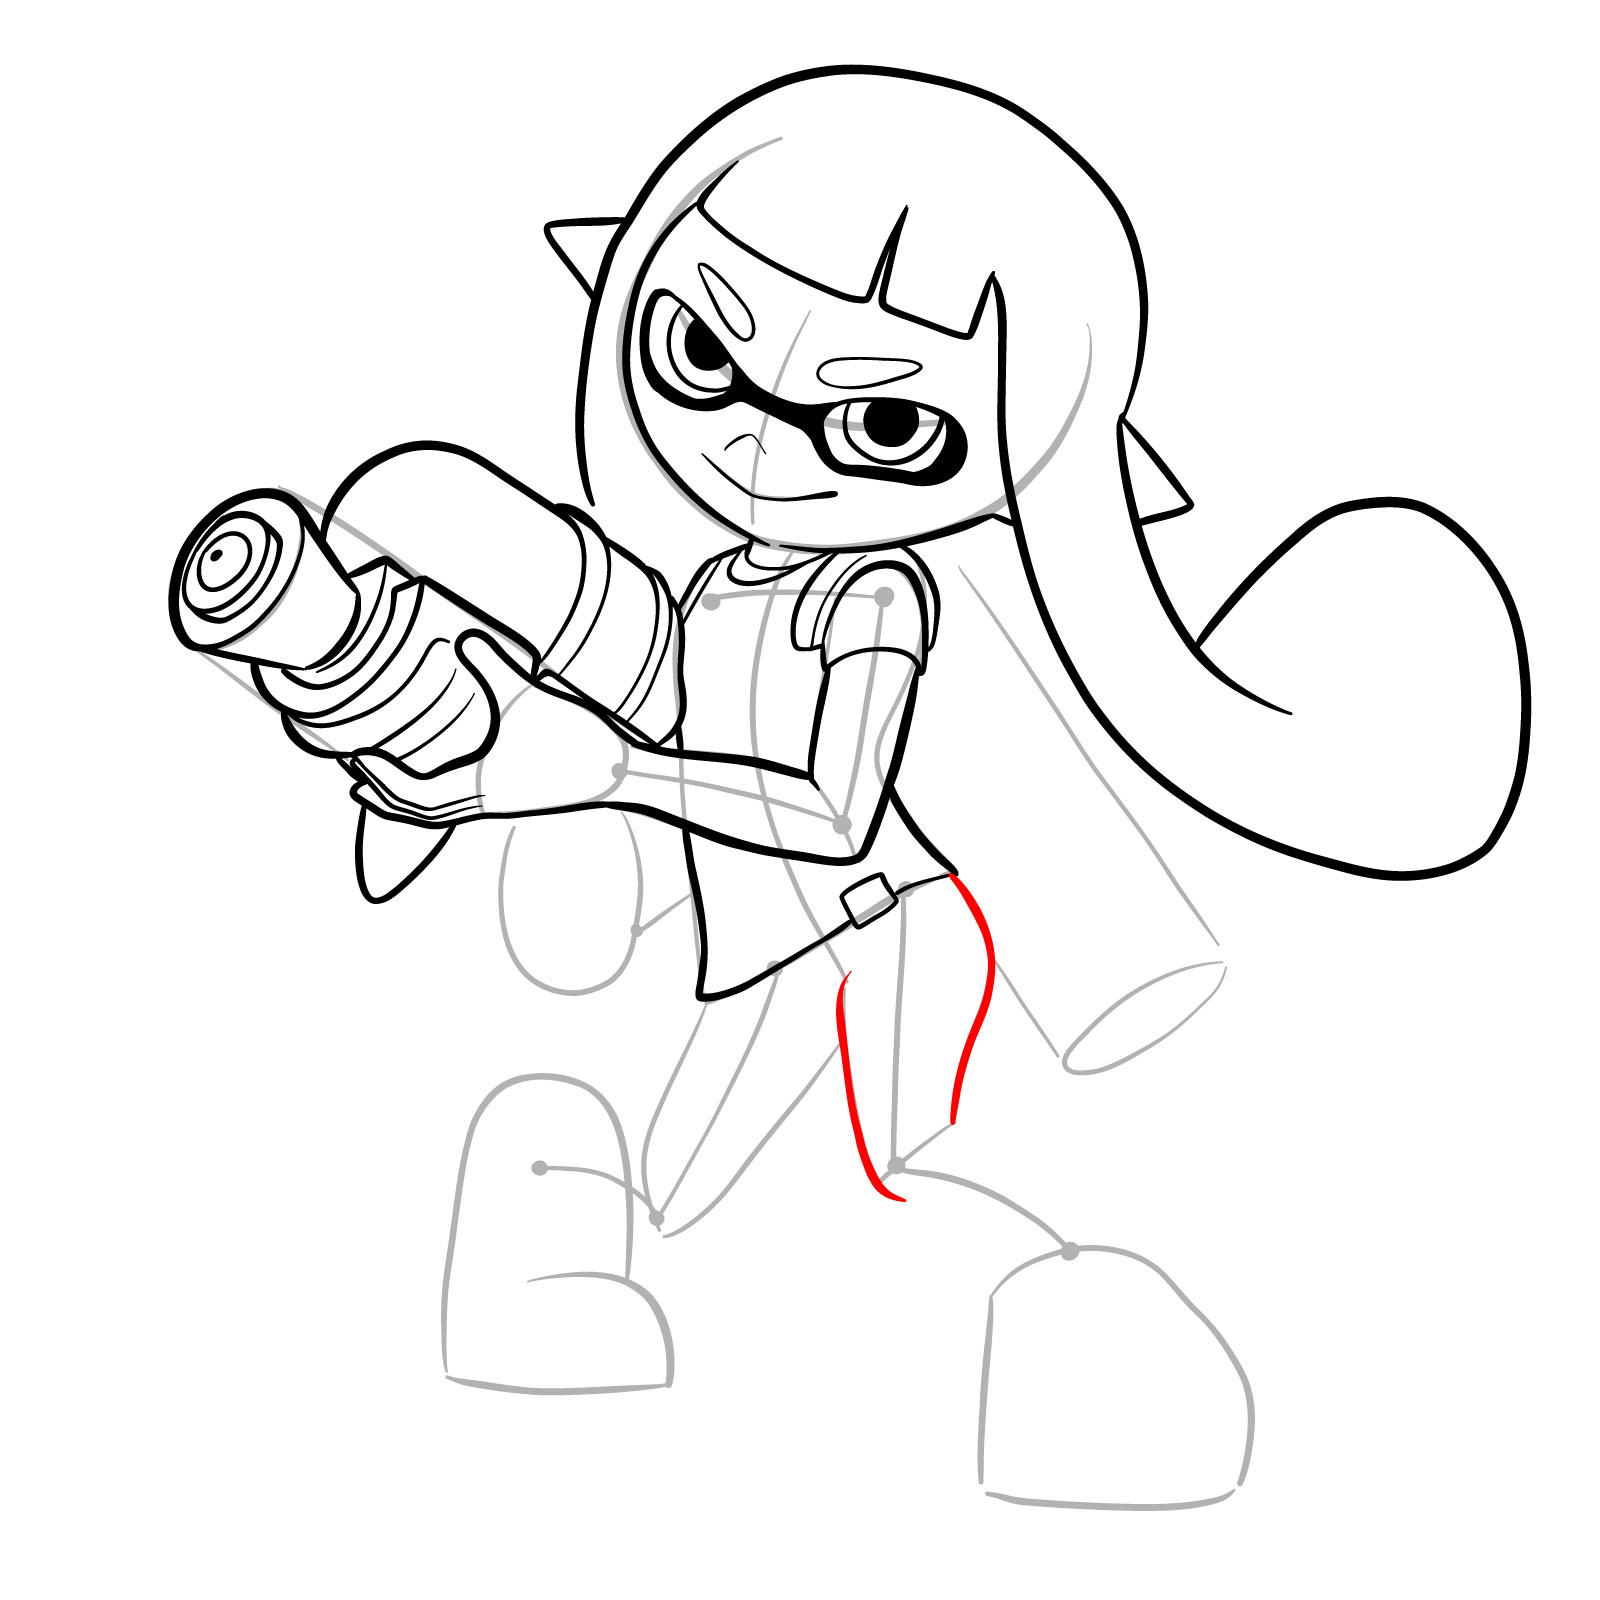 How to draw an Inkling Girl - step 21